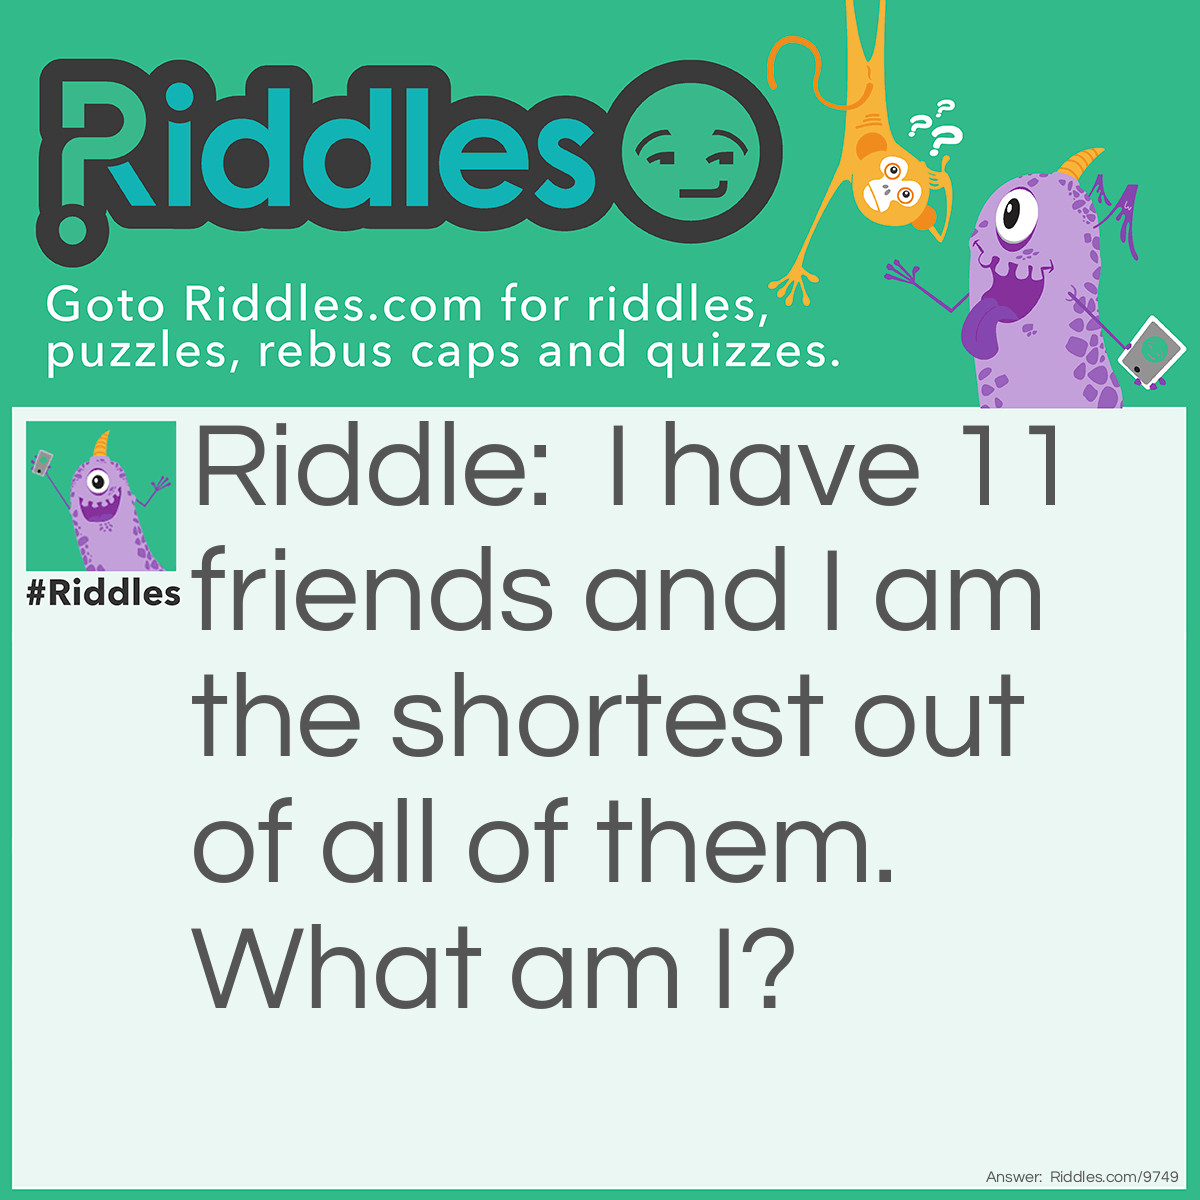 Riddle: I have 11 friends and I am the shortest out of all of them. What am I? Answer: February.